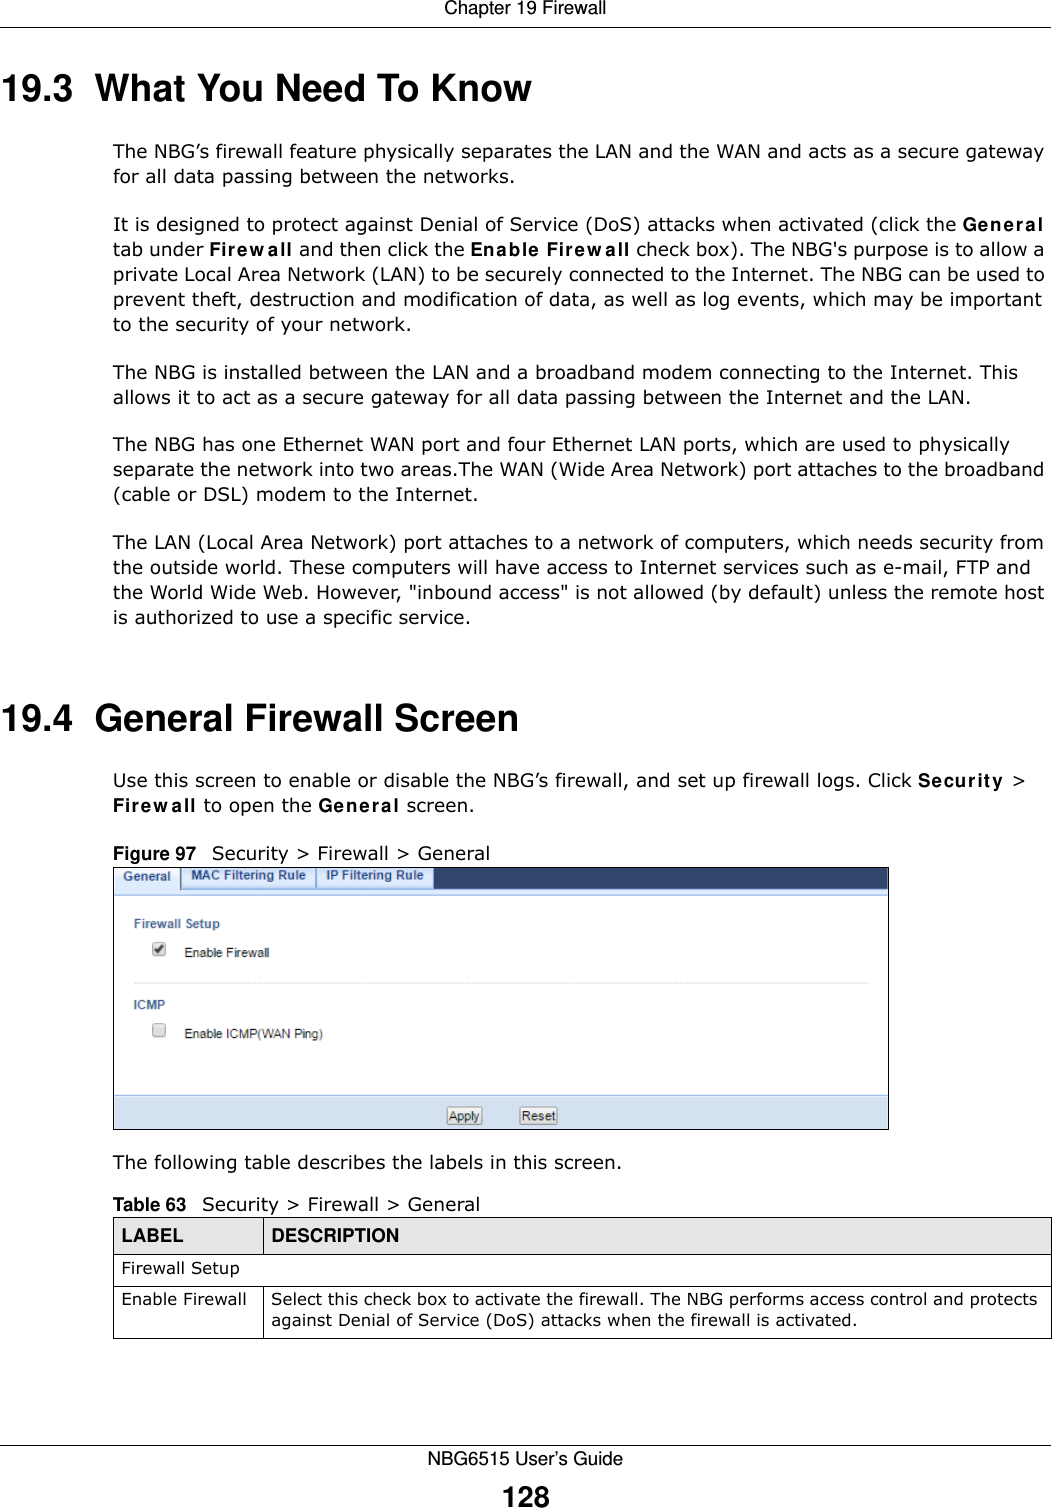 Chapter 19 FirewallNBG6515 User’s Guide12819.3  What You Need To KnowThe NBG’s firewall feature physically separates the LAN and the WAN and acts as a secure gateway for all data passing between the networks.It is designed to protect against Denial of Service (DoS) attacks when activated (click the General tab under Firewall and then click the Enable Firewall check box). The NBG&apos;s purpose is to allow a private Local Area Network (LAN) to be securely connected to the Internet. The NBG can be used to prevent theft, destruction and modification of data, as well as log events, which may be important to the security of your network. The NBG is installed between the LAN and a broadband modem connecting to the Internet. This allows it to act as a secure gateway for all data passing between the Internet and the LAN.The NBG has one Ethernet WAN port and four Ethernet LAN ports, which are used to physically separate the network into two areas.The WAN (Wide Area Network) port attaches to the broadband (cable or DSL) modem to the Internet.The LAN (Local Area Network) port attaches to a network of computers, which needs security from the outside world. These computers will have access to Internet services such as e-mail, FTP and the World Wide Web. However, &quot;inbound access&quot; is not allowed (by default) unless the remote host is authorized to use a specific service.19.4  General Firewall Screen   Use this screen to enable or disable the NBG’s firewall, and set up firewall logs. Click Security &gt; Firewall to open the General screen.Figure 97   Security &gt; Firewall &gt; General The following table describes the labels in this screen.Table 63   Security &gt; Firewall &gt; General LABEL DESCRIPTIONFirewall SetupEnable Firewall Select this check box to activate the firewall. The NBG performs access control and protects against Denial of Service (DoS) attacks when the firewall is activated.